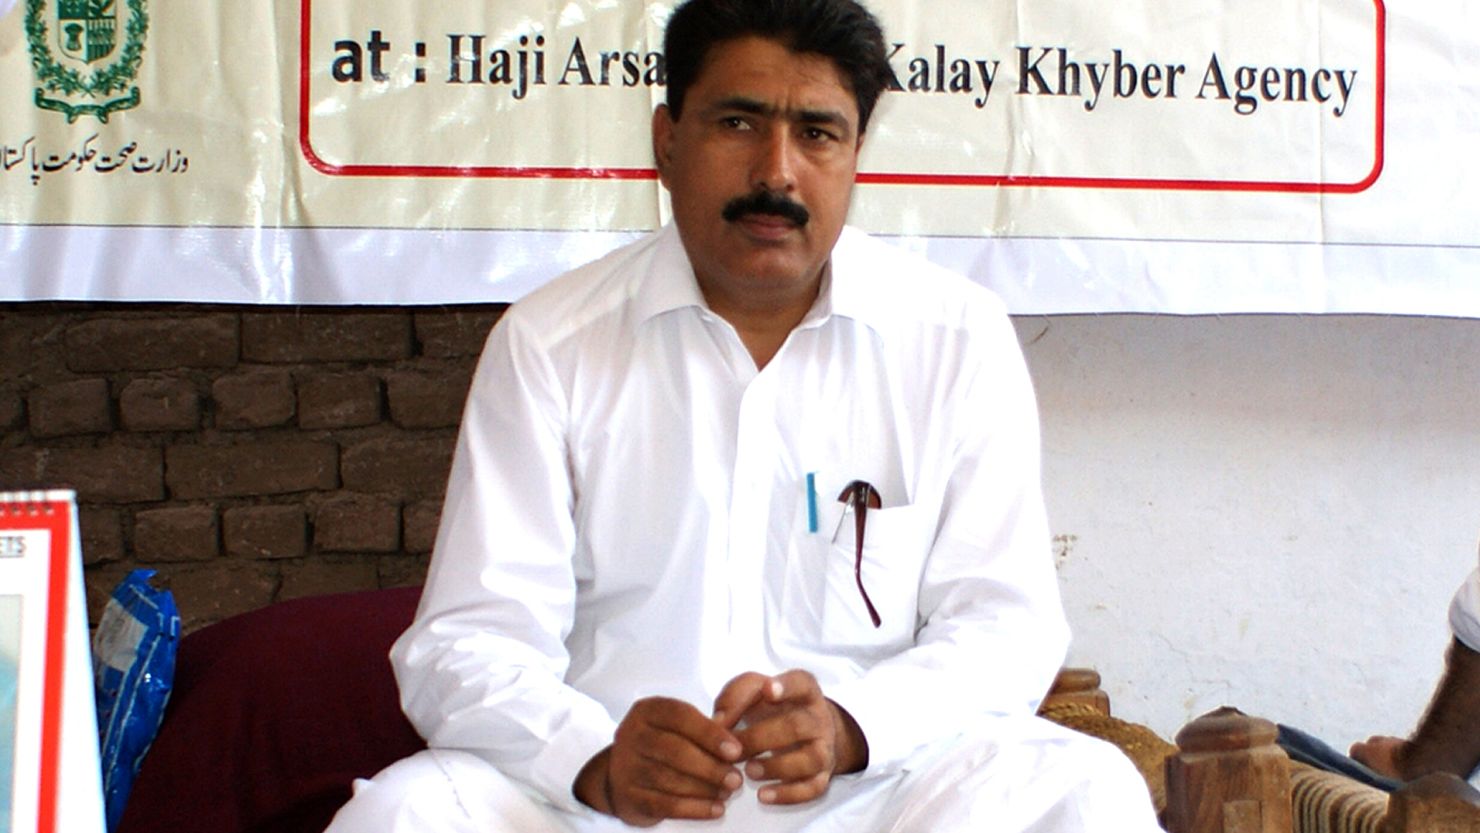 This photograph taken on July 22, 2010, shows Pakistani surgeon Shakeel Afridi, who was working for CIA to help find Osama bin Laden, attending a Malaria control campaign in Khyber tribal district. Pakistan's problematic relationship with the United States sailed into fresh controversy as US lawmakers warned of aid cuts after the jailing of a surgeon who helped the CIA hunt down Osama bin Laden. Shakeeel Afridi was found guilty of treason, sentenced to 33 years in prison and fined 320,000 rupees (3,500 USD) under an archaic tribal justice system that has governed Pakistan's semi-autonomous tribal belt since British rule. AFP PHOTO / MOHAMMAD RAUF (Photo credit should read MOHAMMAD RAUF/AFP/GettyImages)